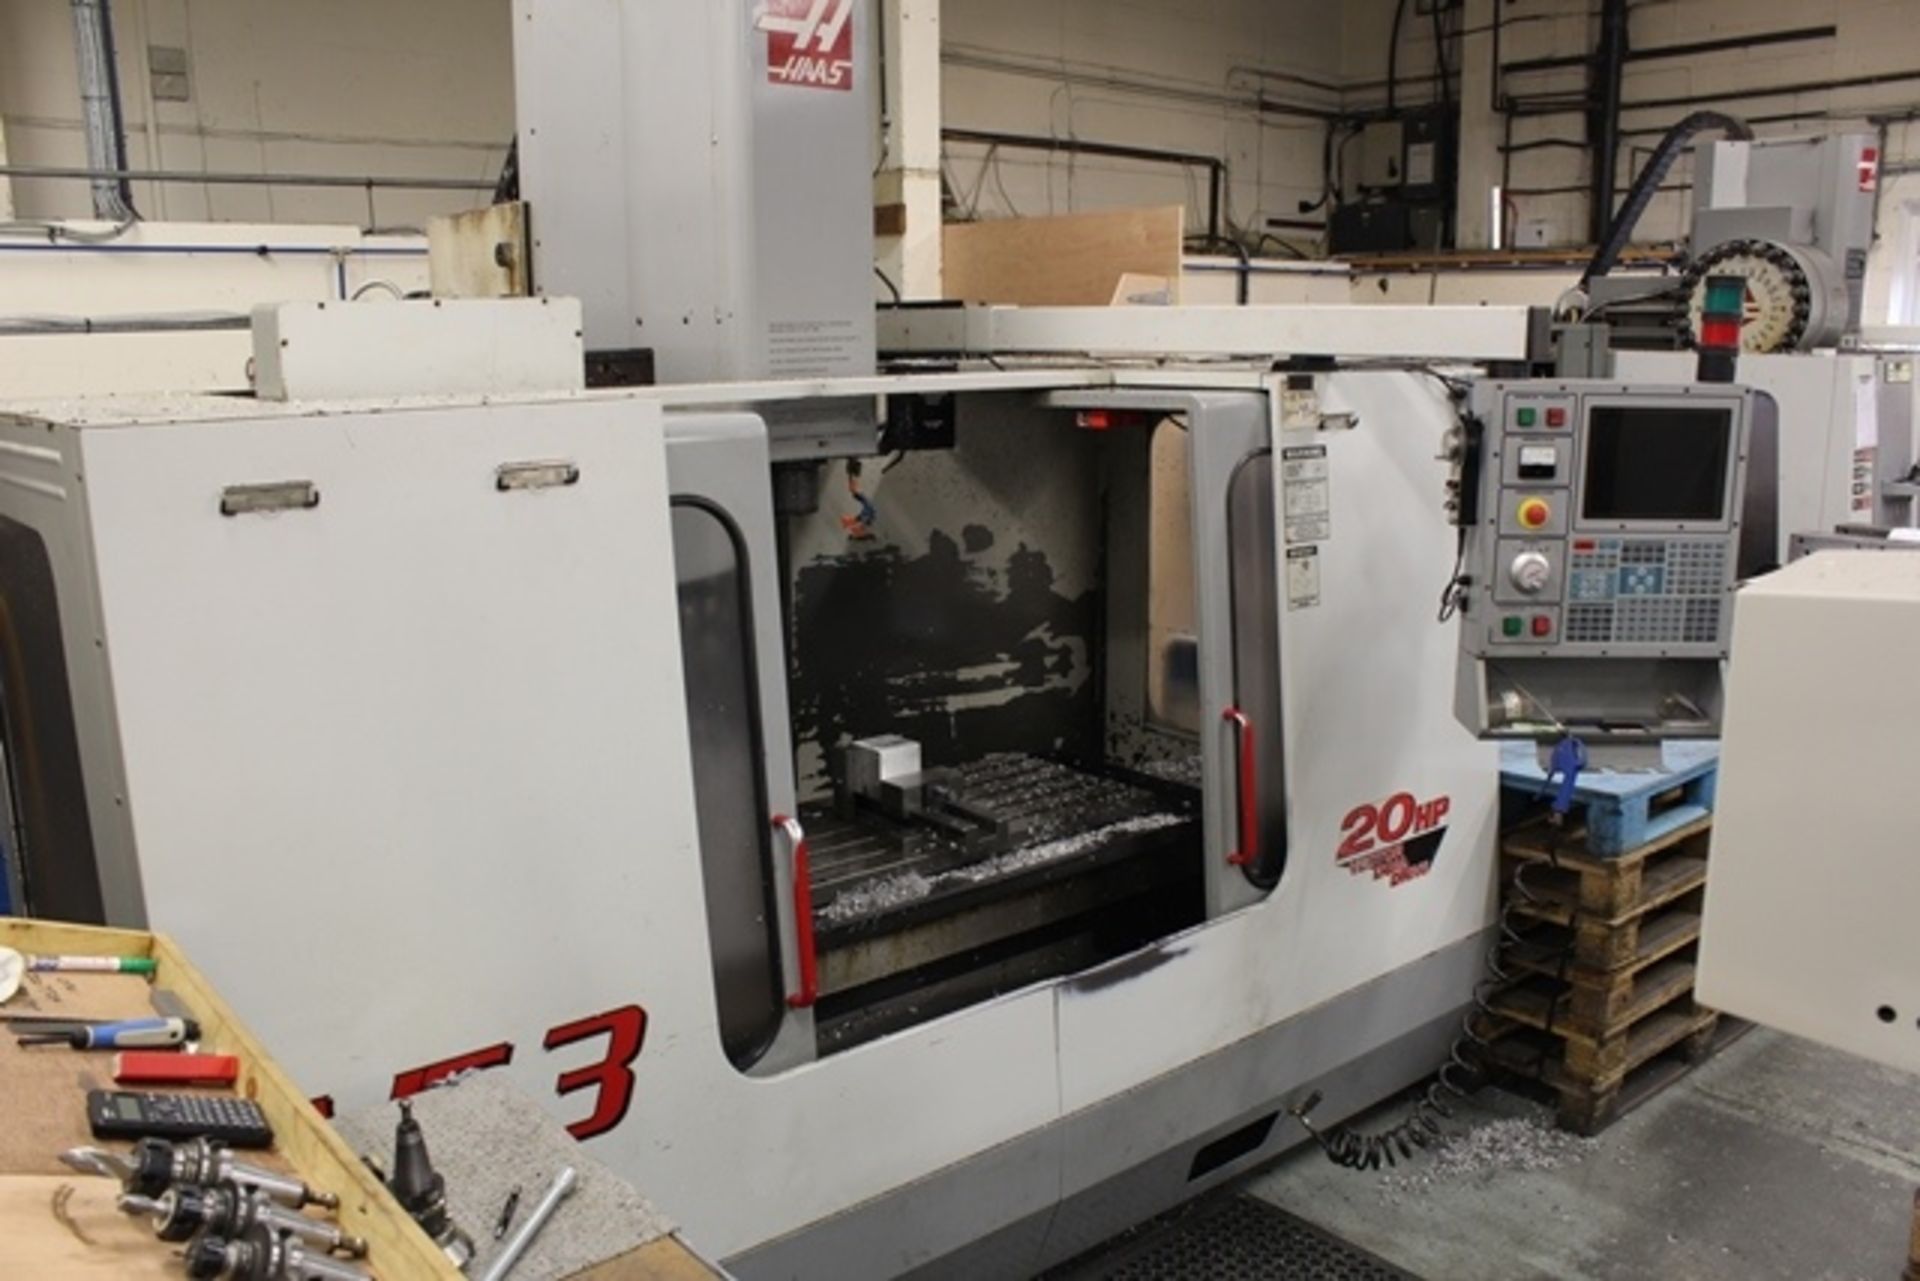 Haas model VF3, CNC vertical machining centre, serial no: 20843 (2001), Haas CNC control with hand